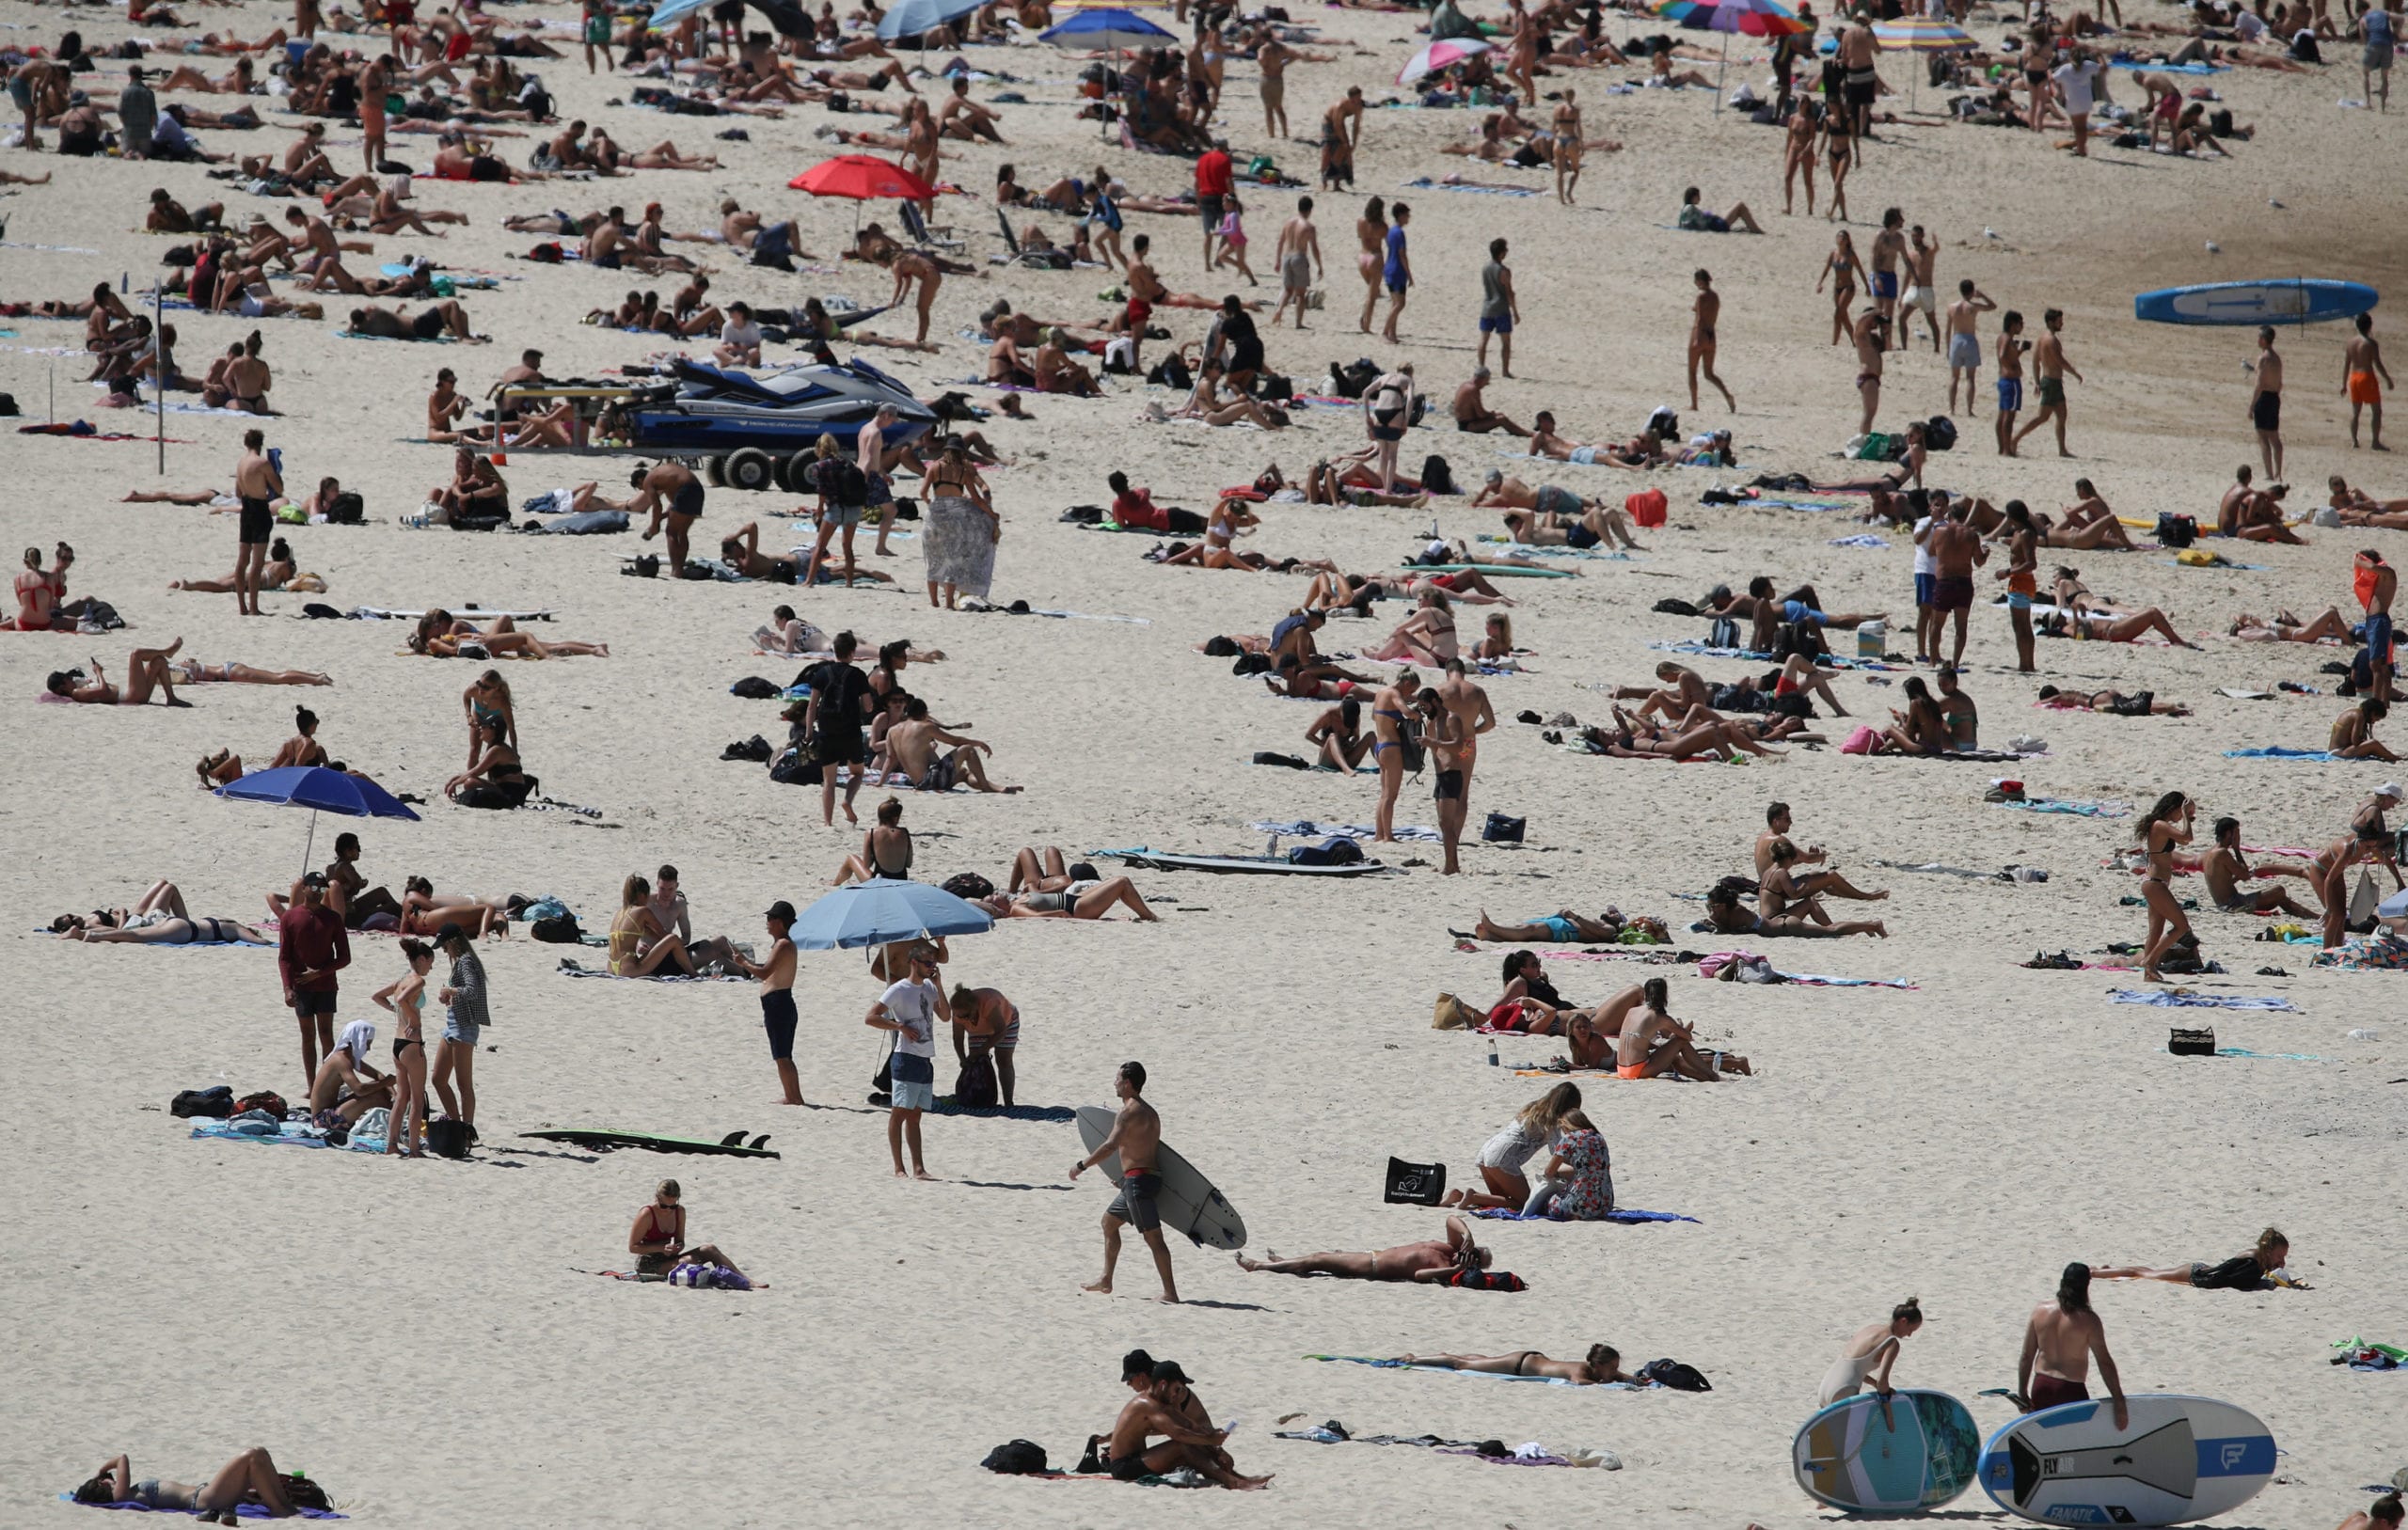 Bondi closed after beachgoers condemned for ignoring social distancing rules